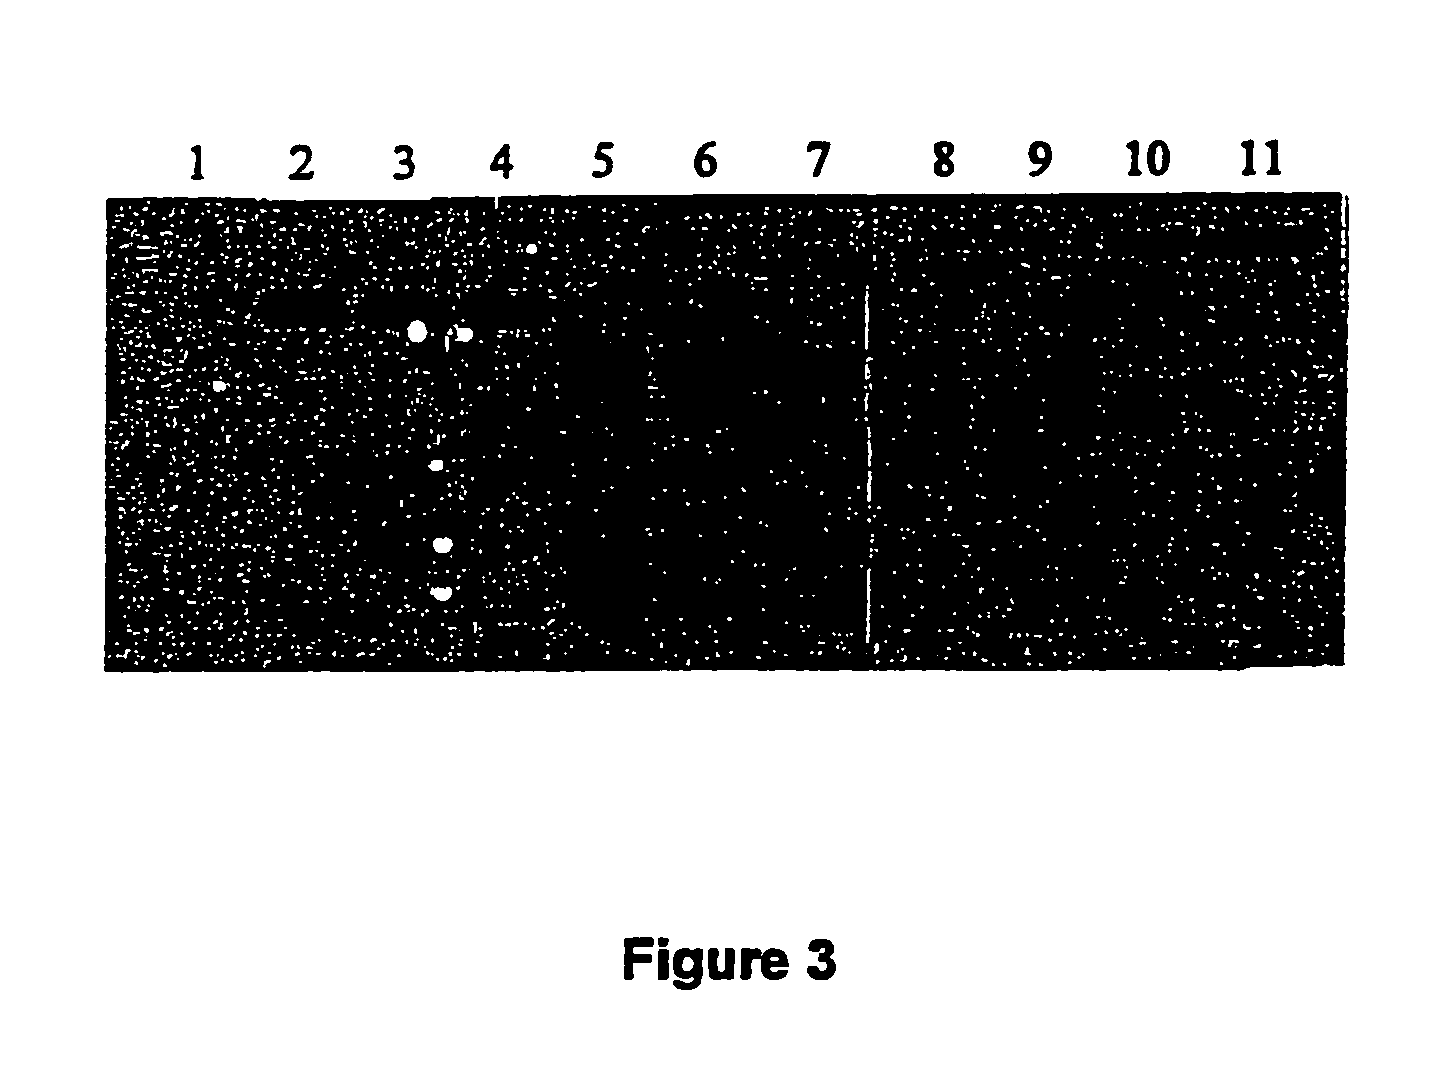 Methods of RNA and protein synthesis